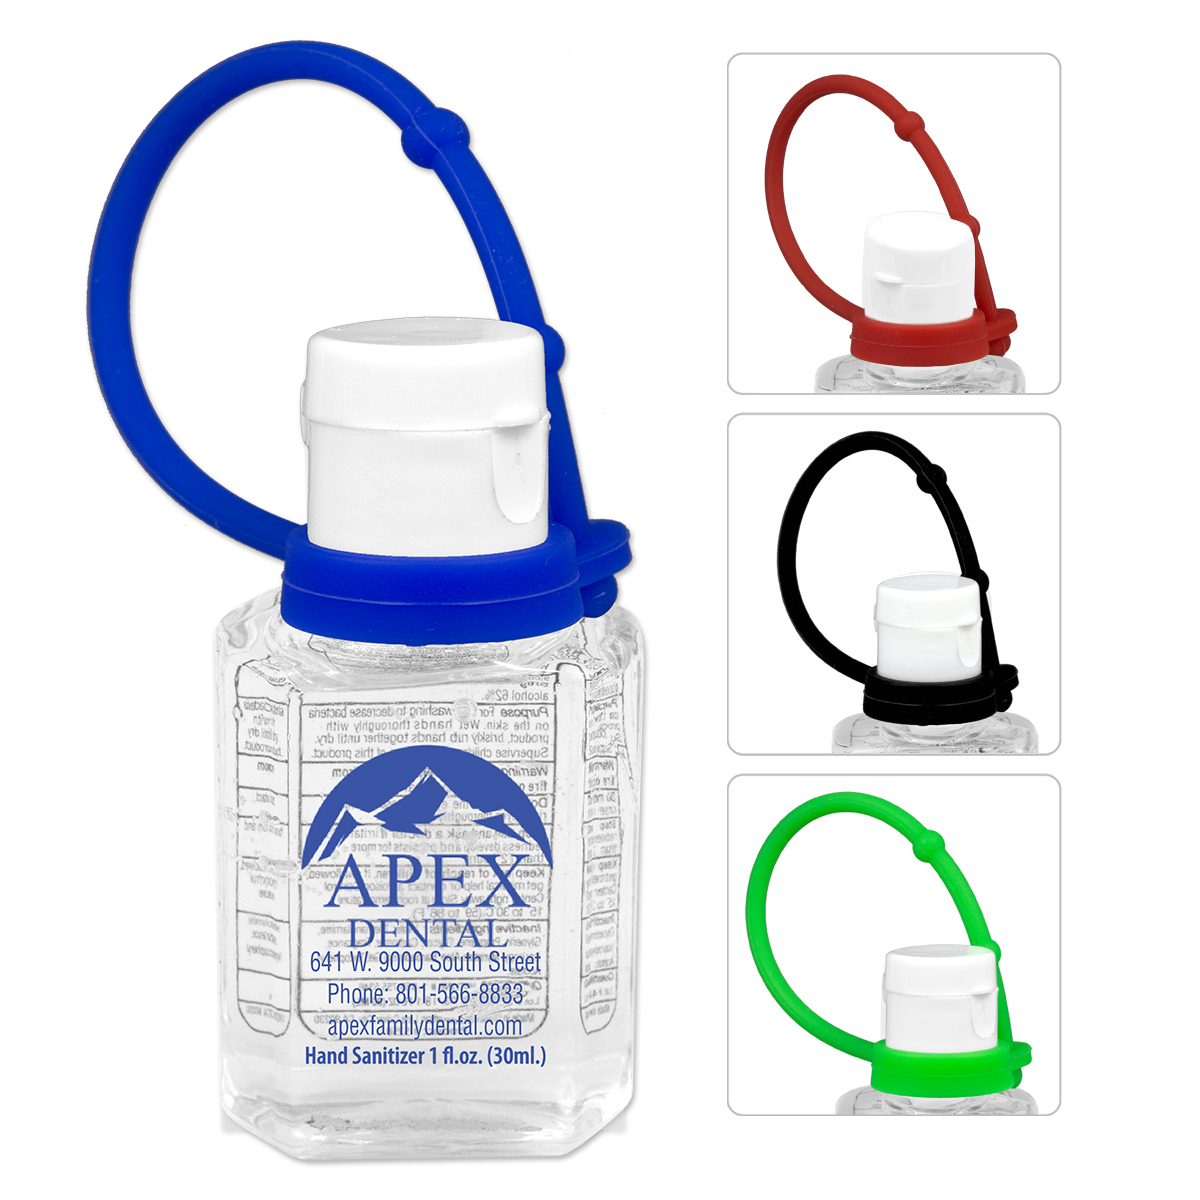 “SanPal Connect” 1.0 oz Compact Hand Sanitizer Antibacterial Gel in Flip-Top Squeeze Bottle with Colorful Silicone Leash